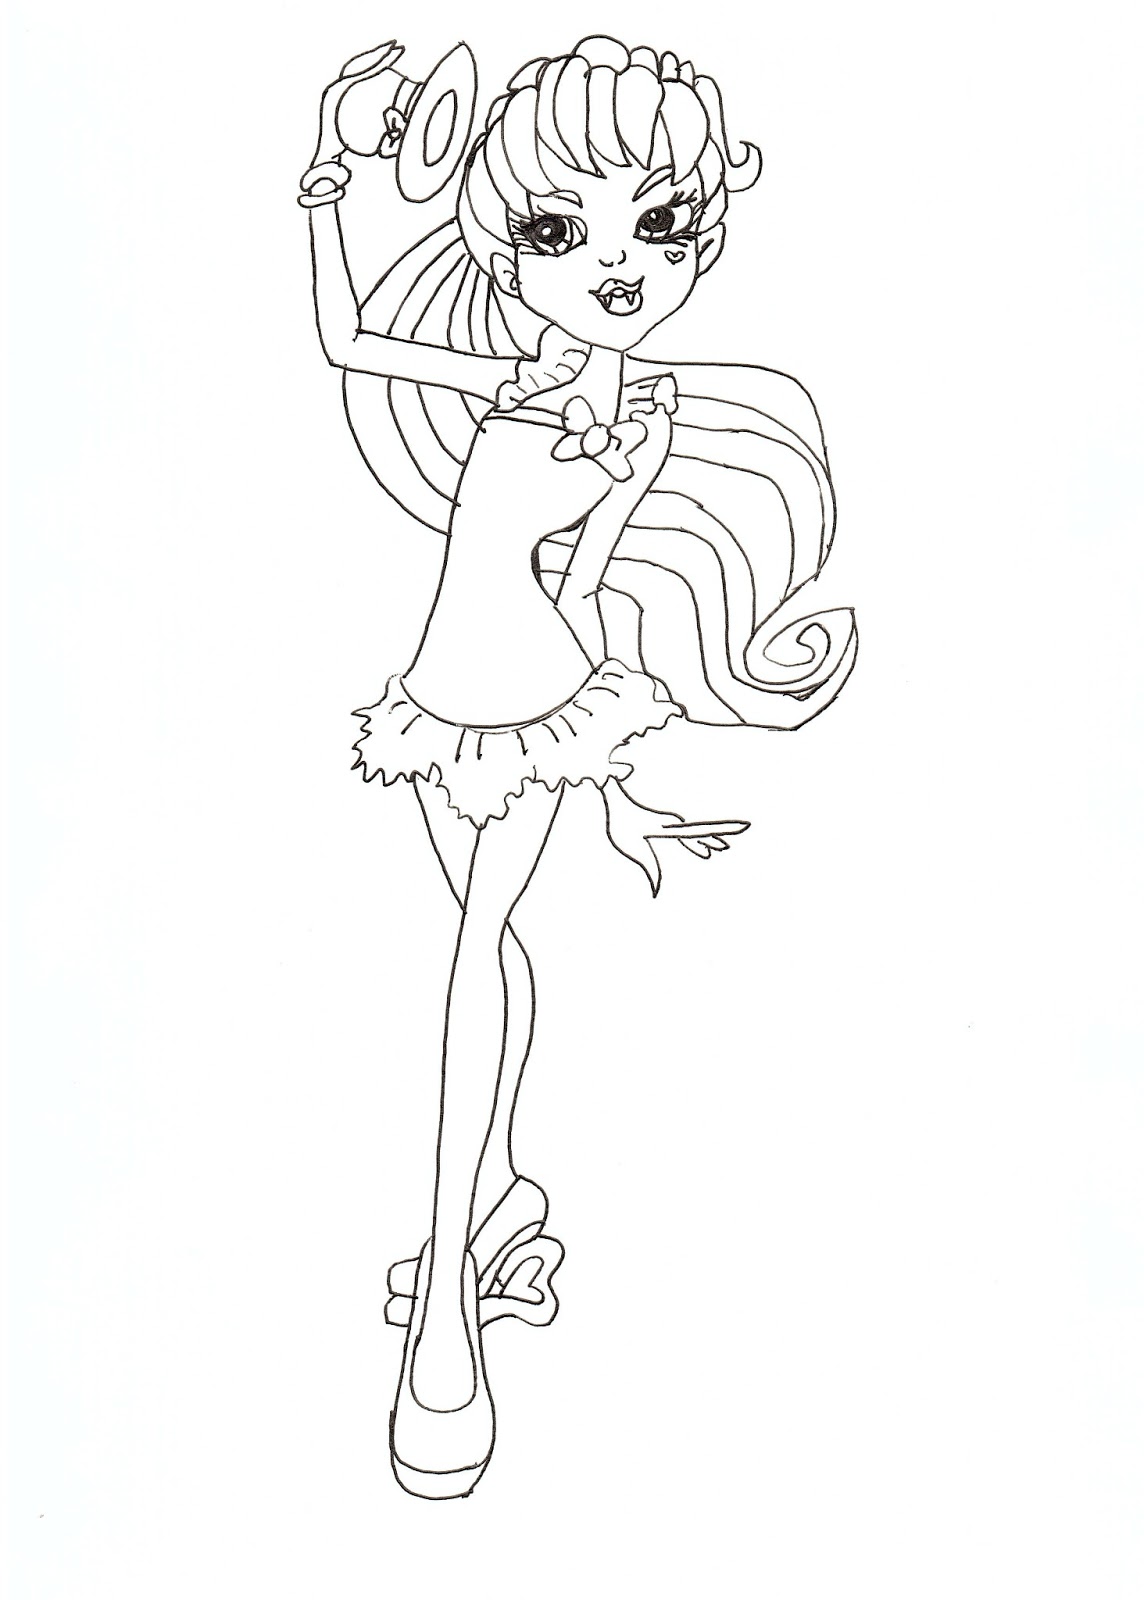 Download Free Printable Monster High Coloring Pages: Draculaura Free Coloring Sheet